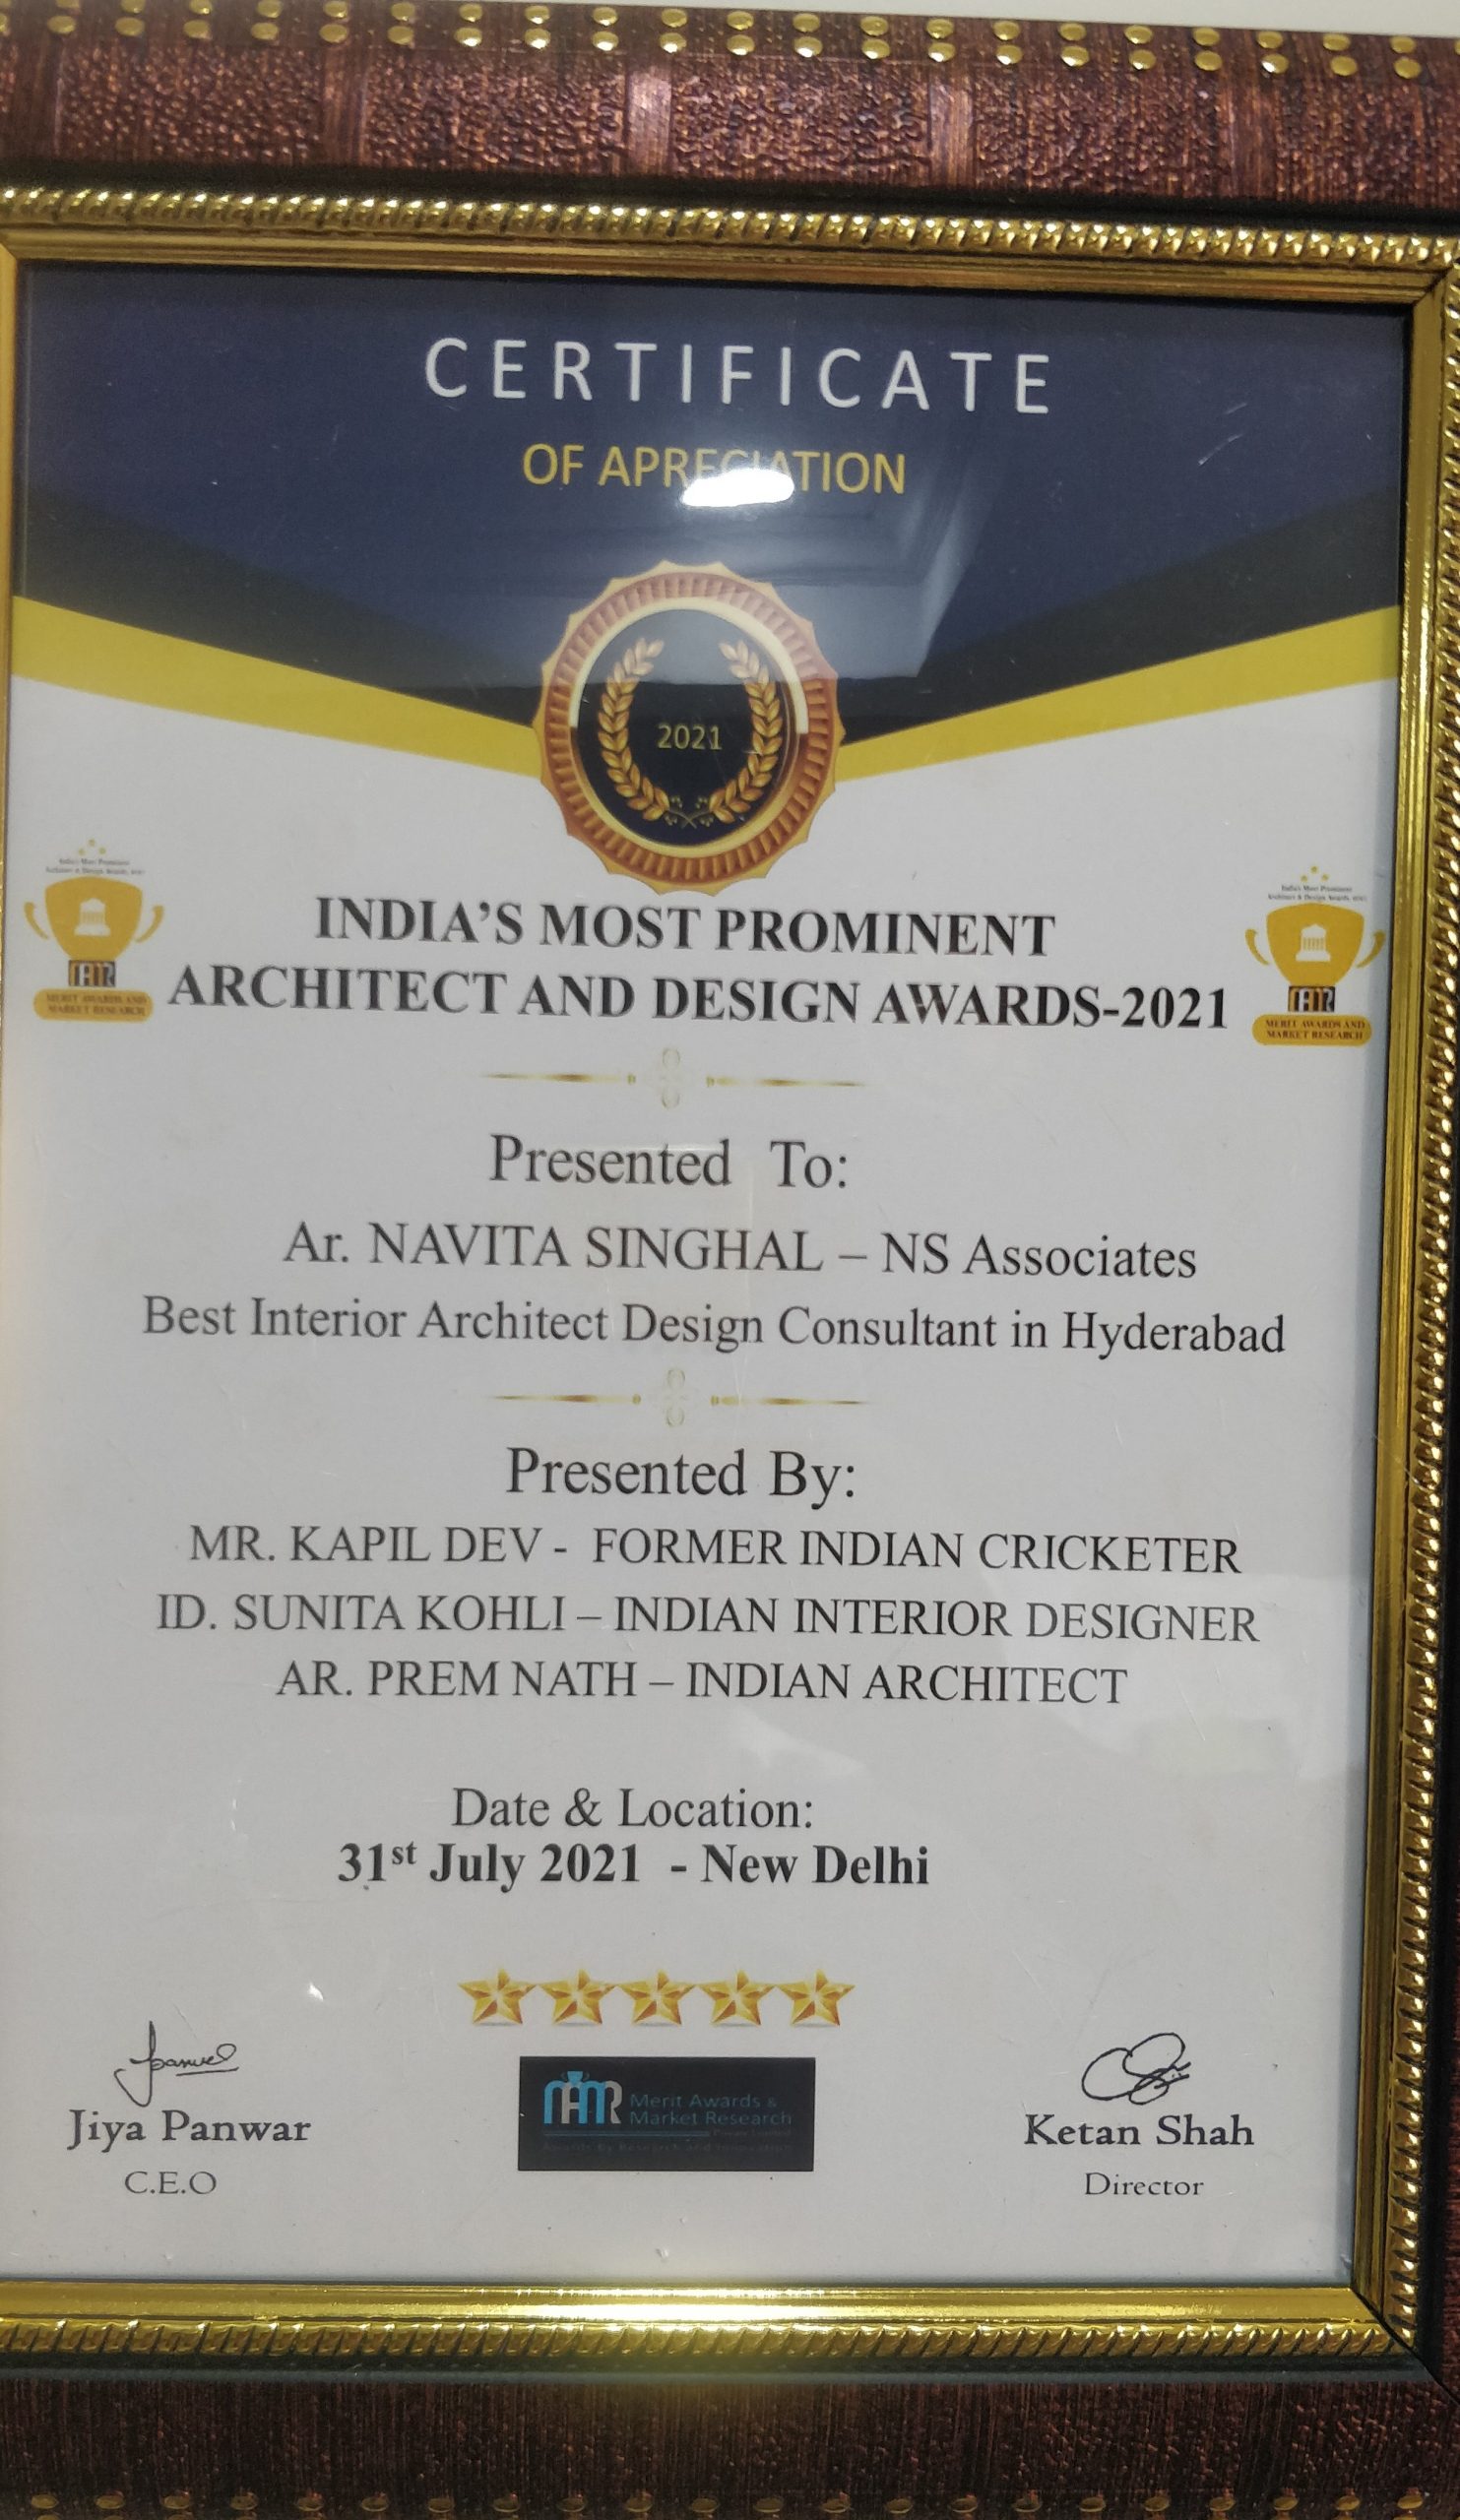 India's Most Prominent Architect and Design Awards